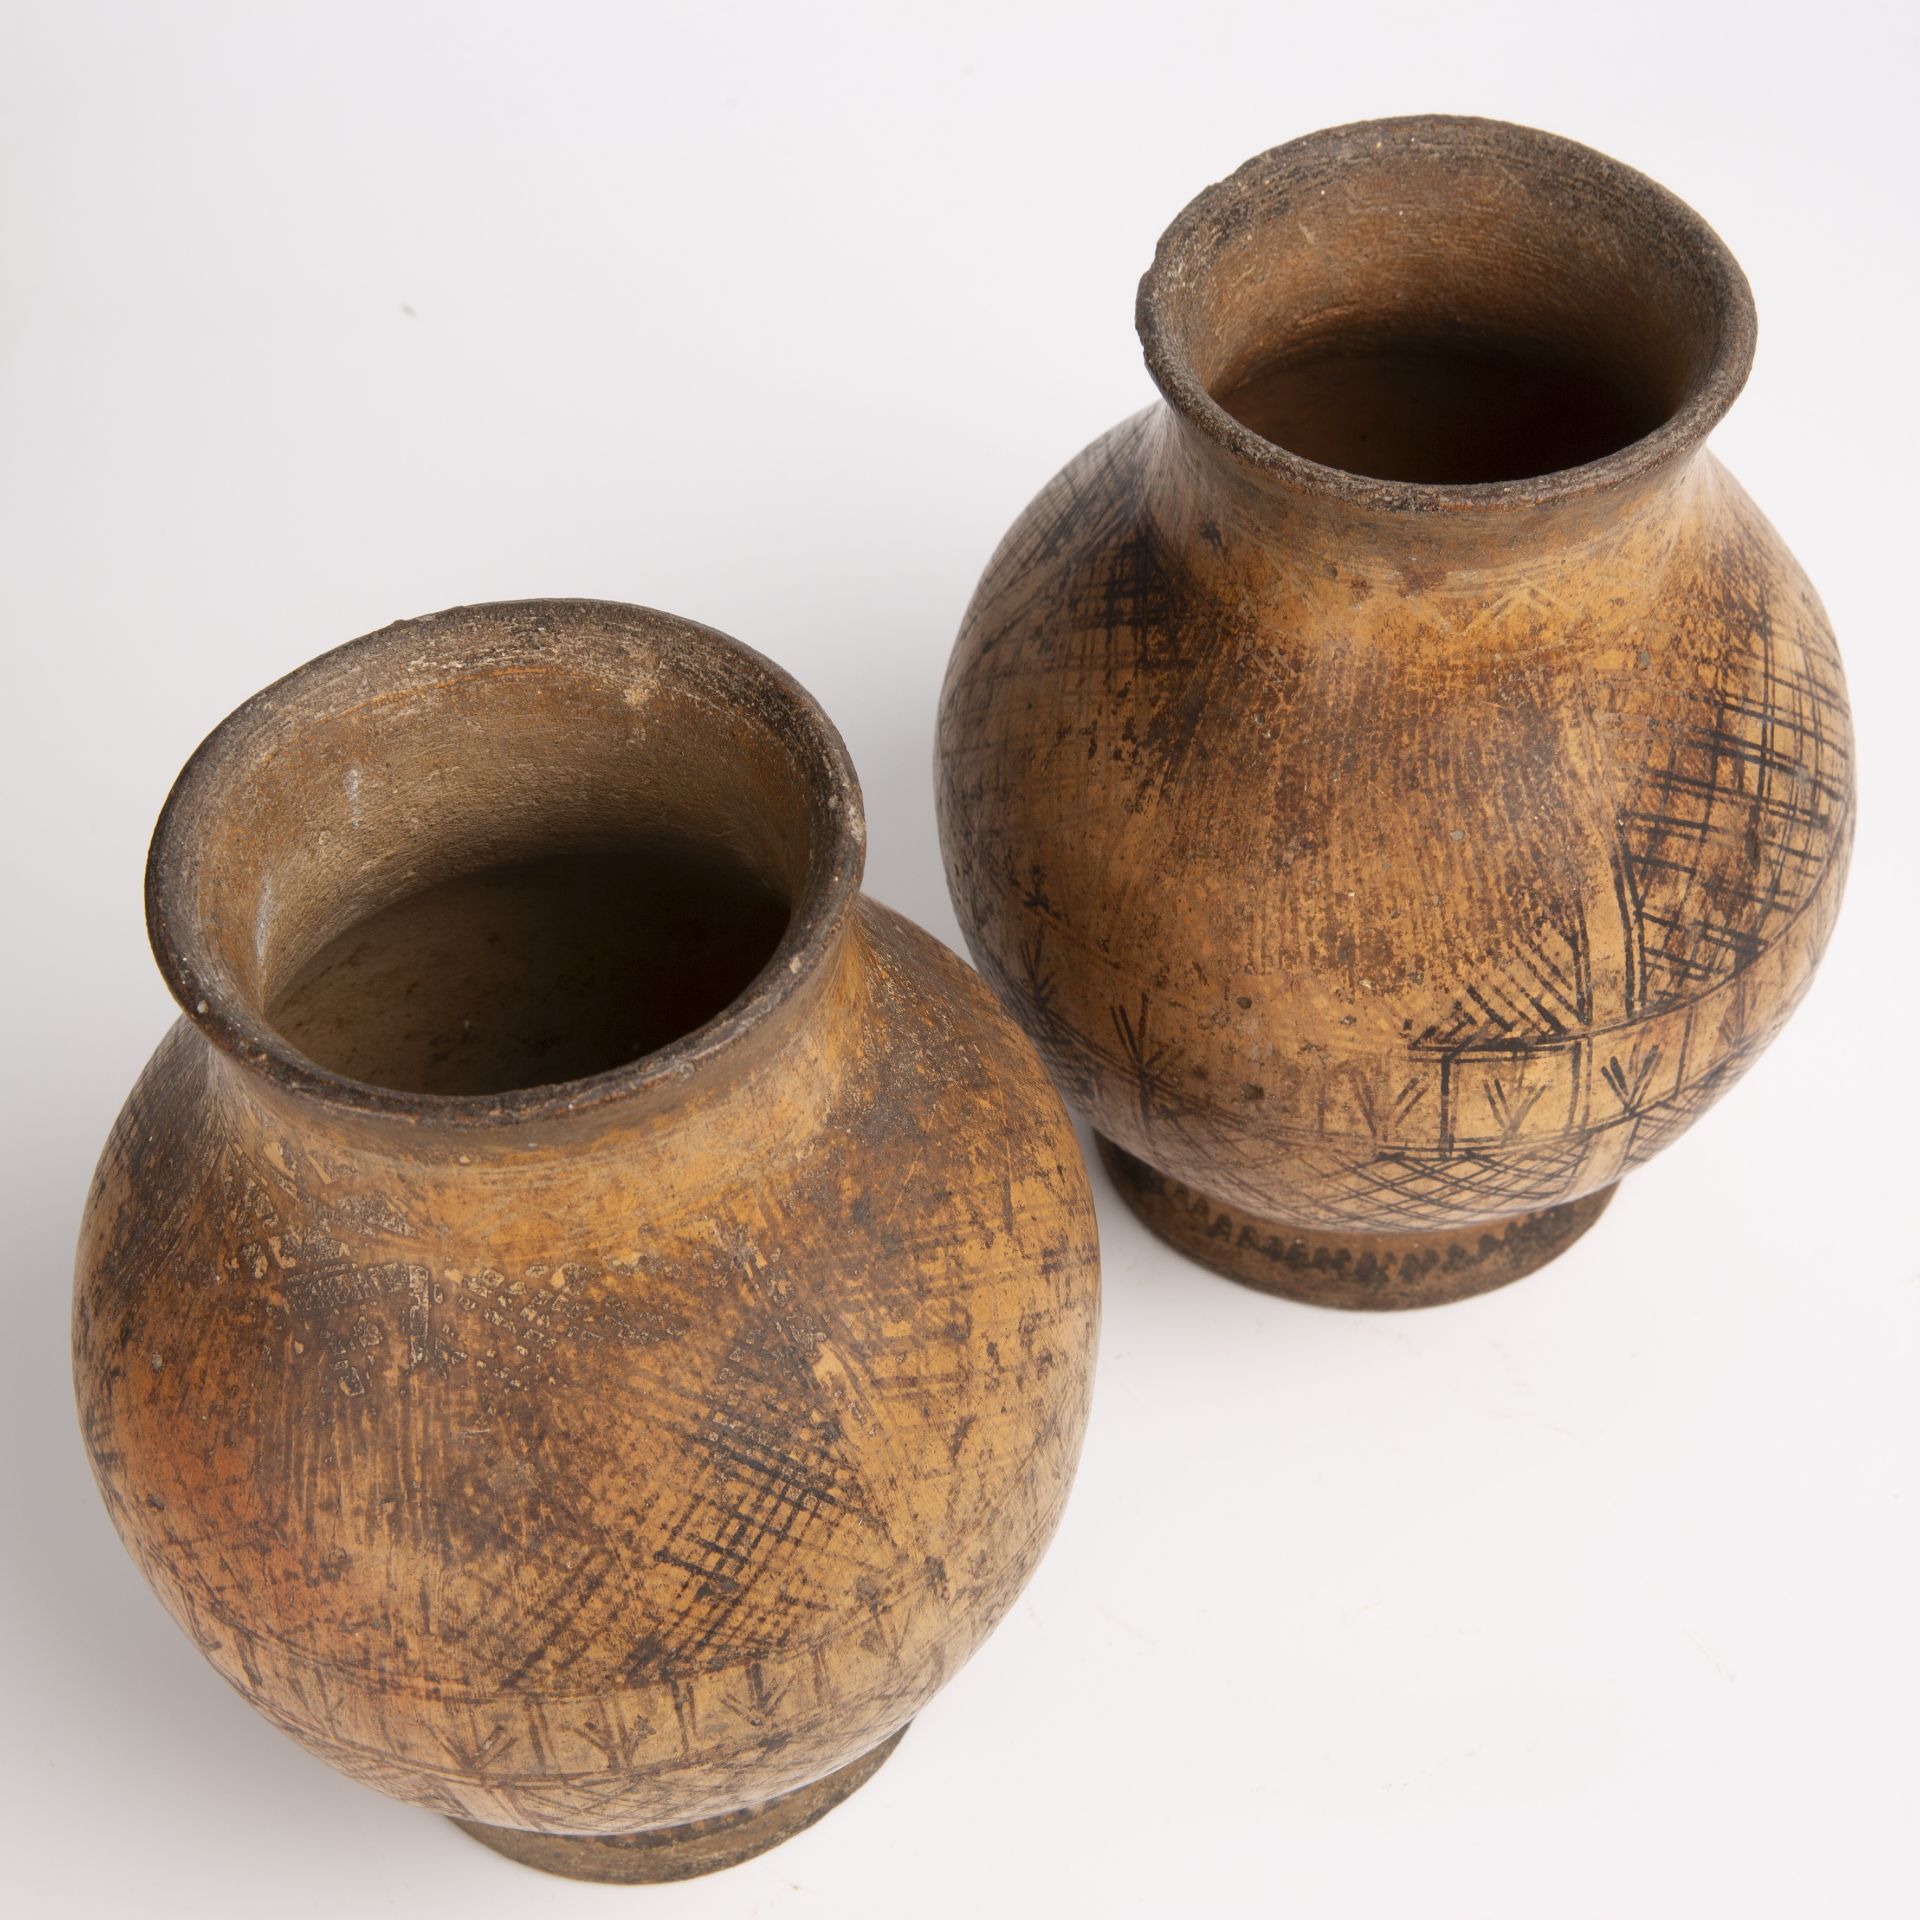 Two early bronze age pottery vessels 3000bc each 15cm wide 18cm high with a dealers certificate - Bild 4 aus 5